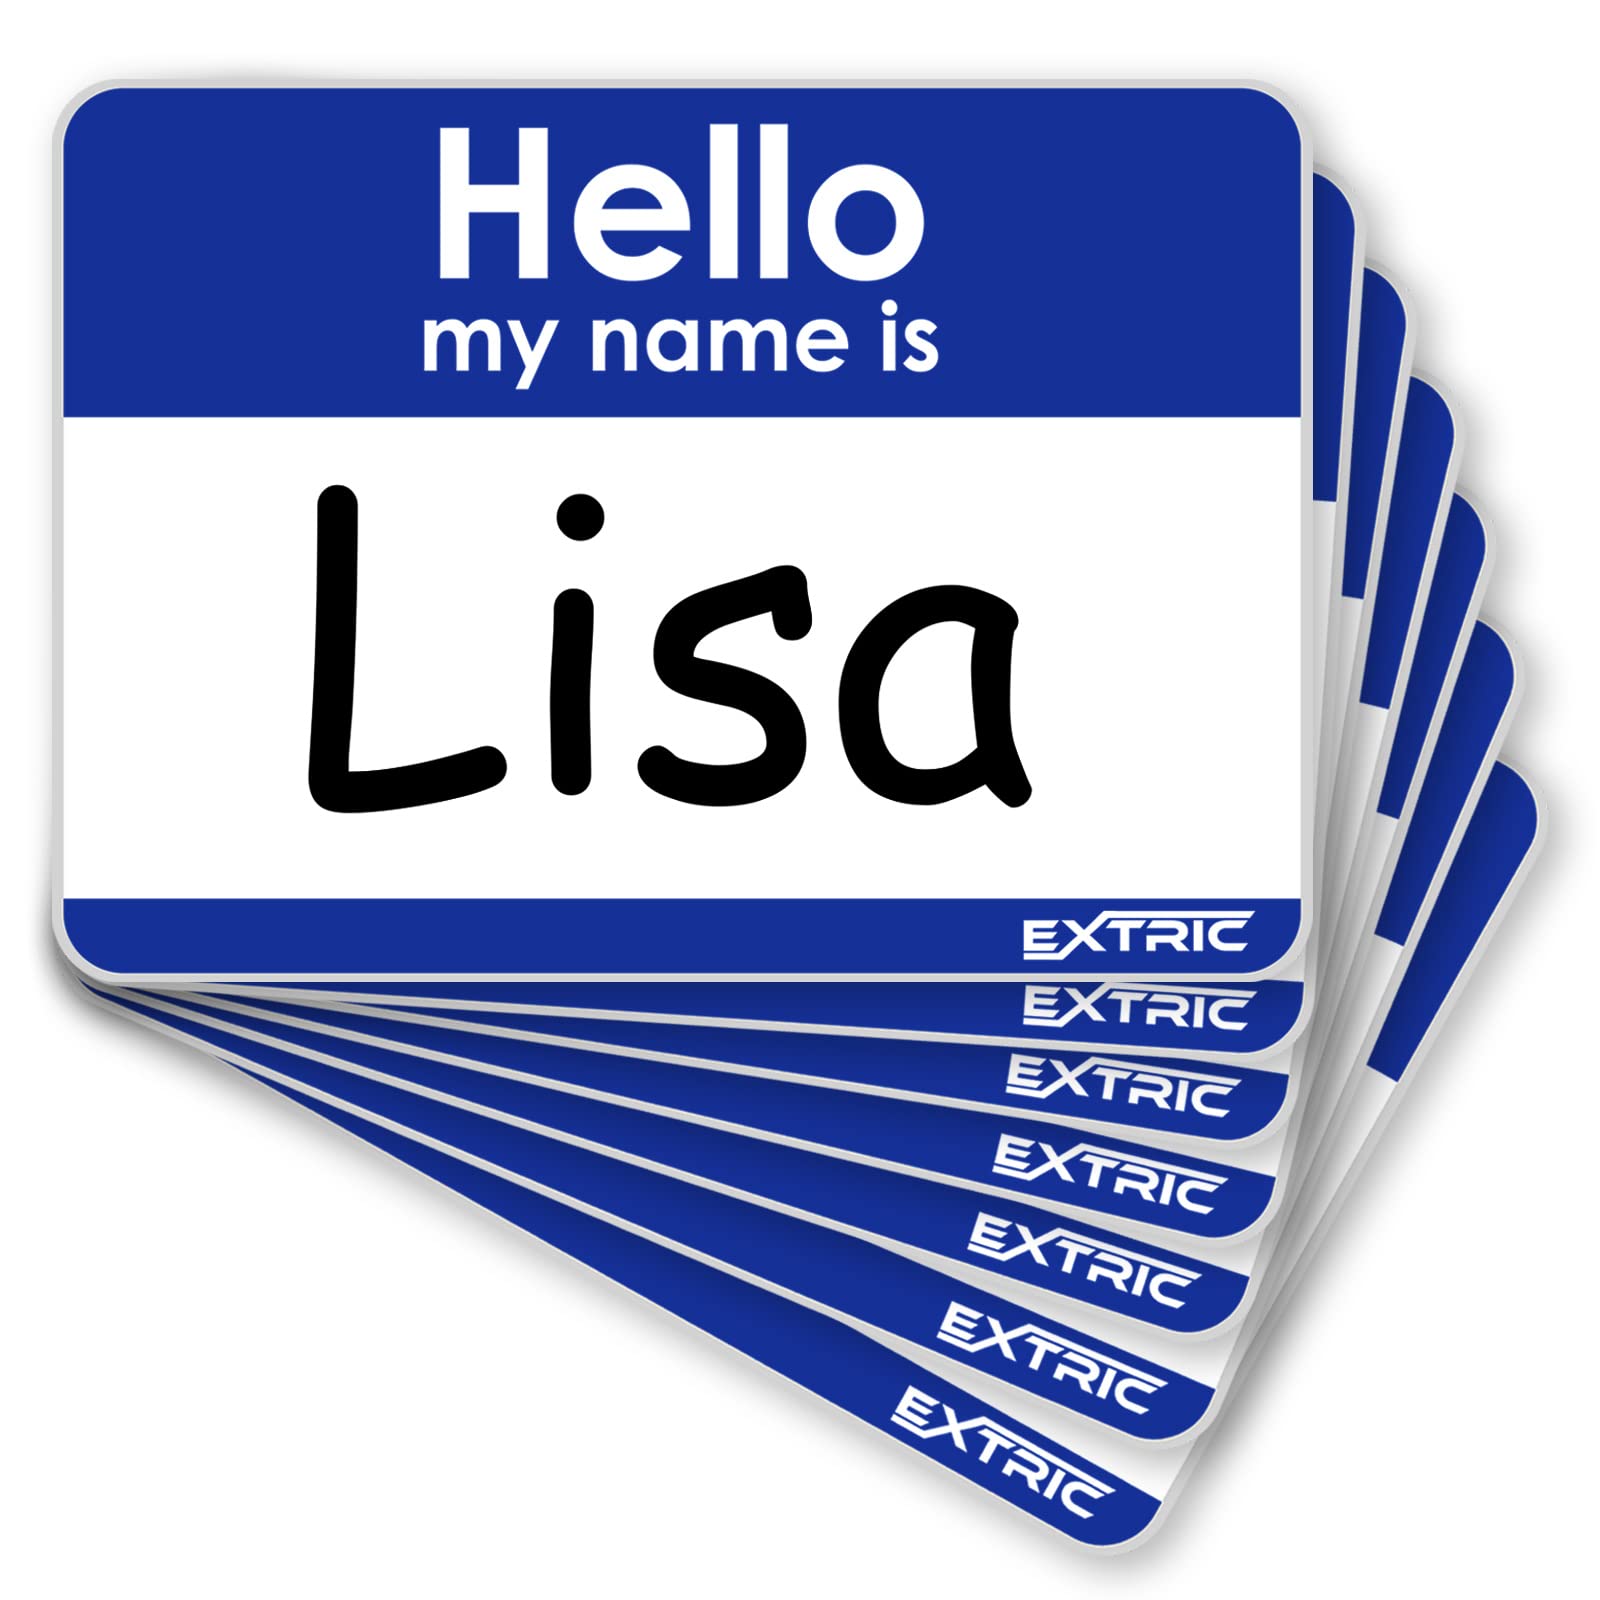 Name tag with Hello, my name is [Your Name]